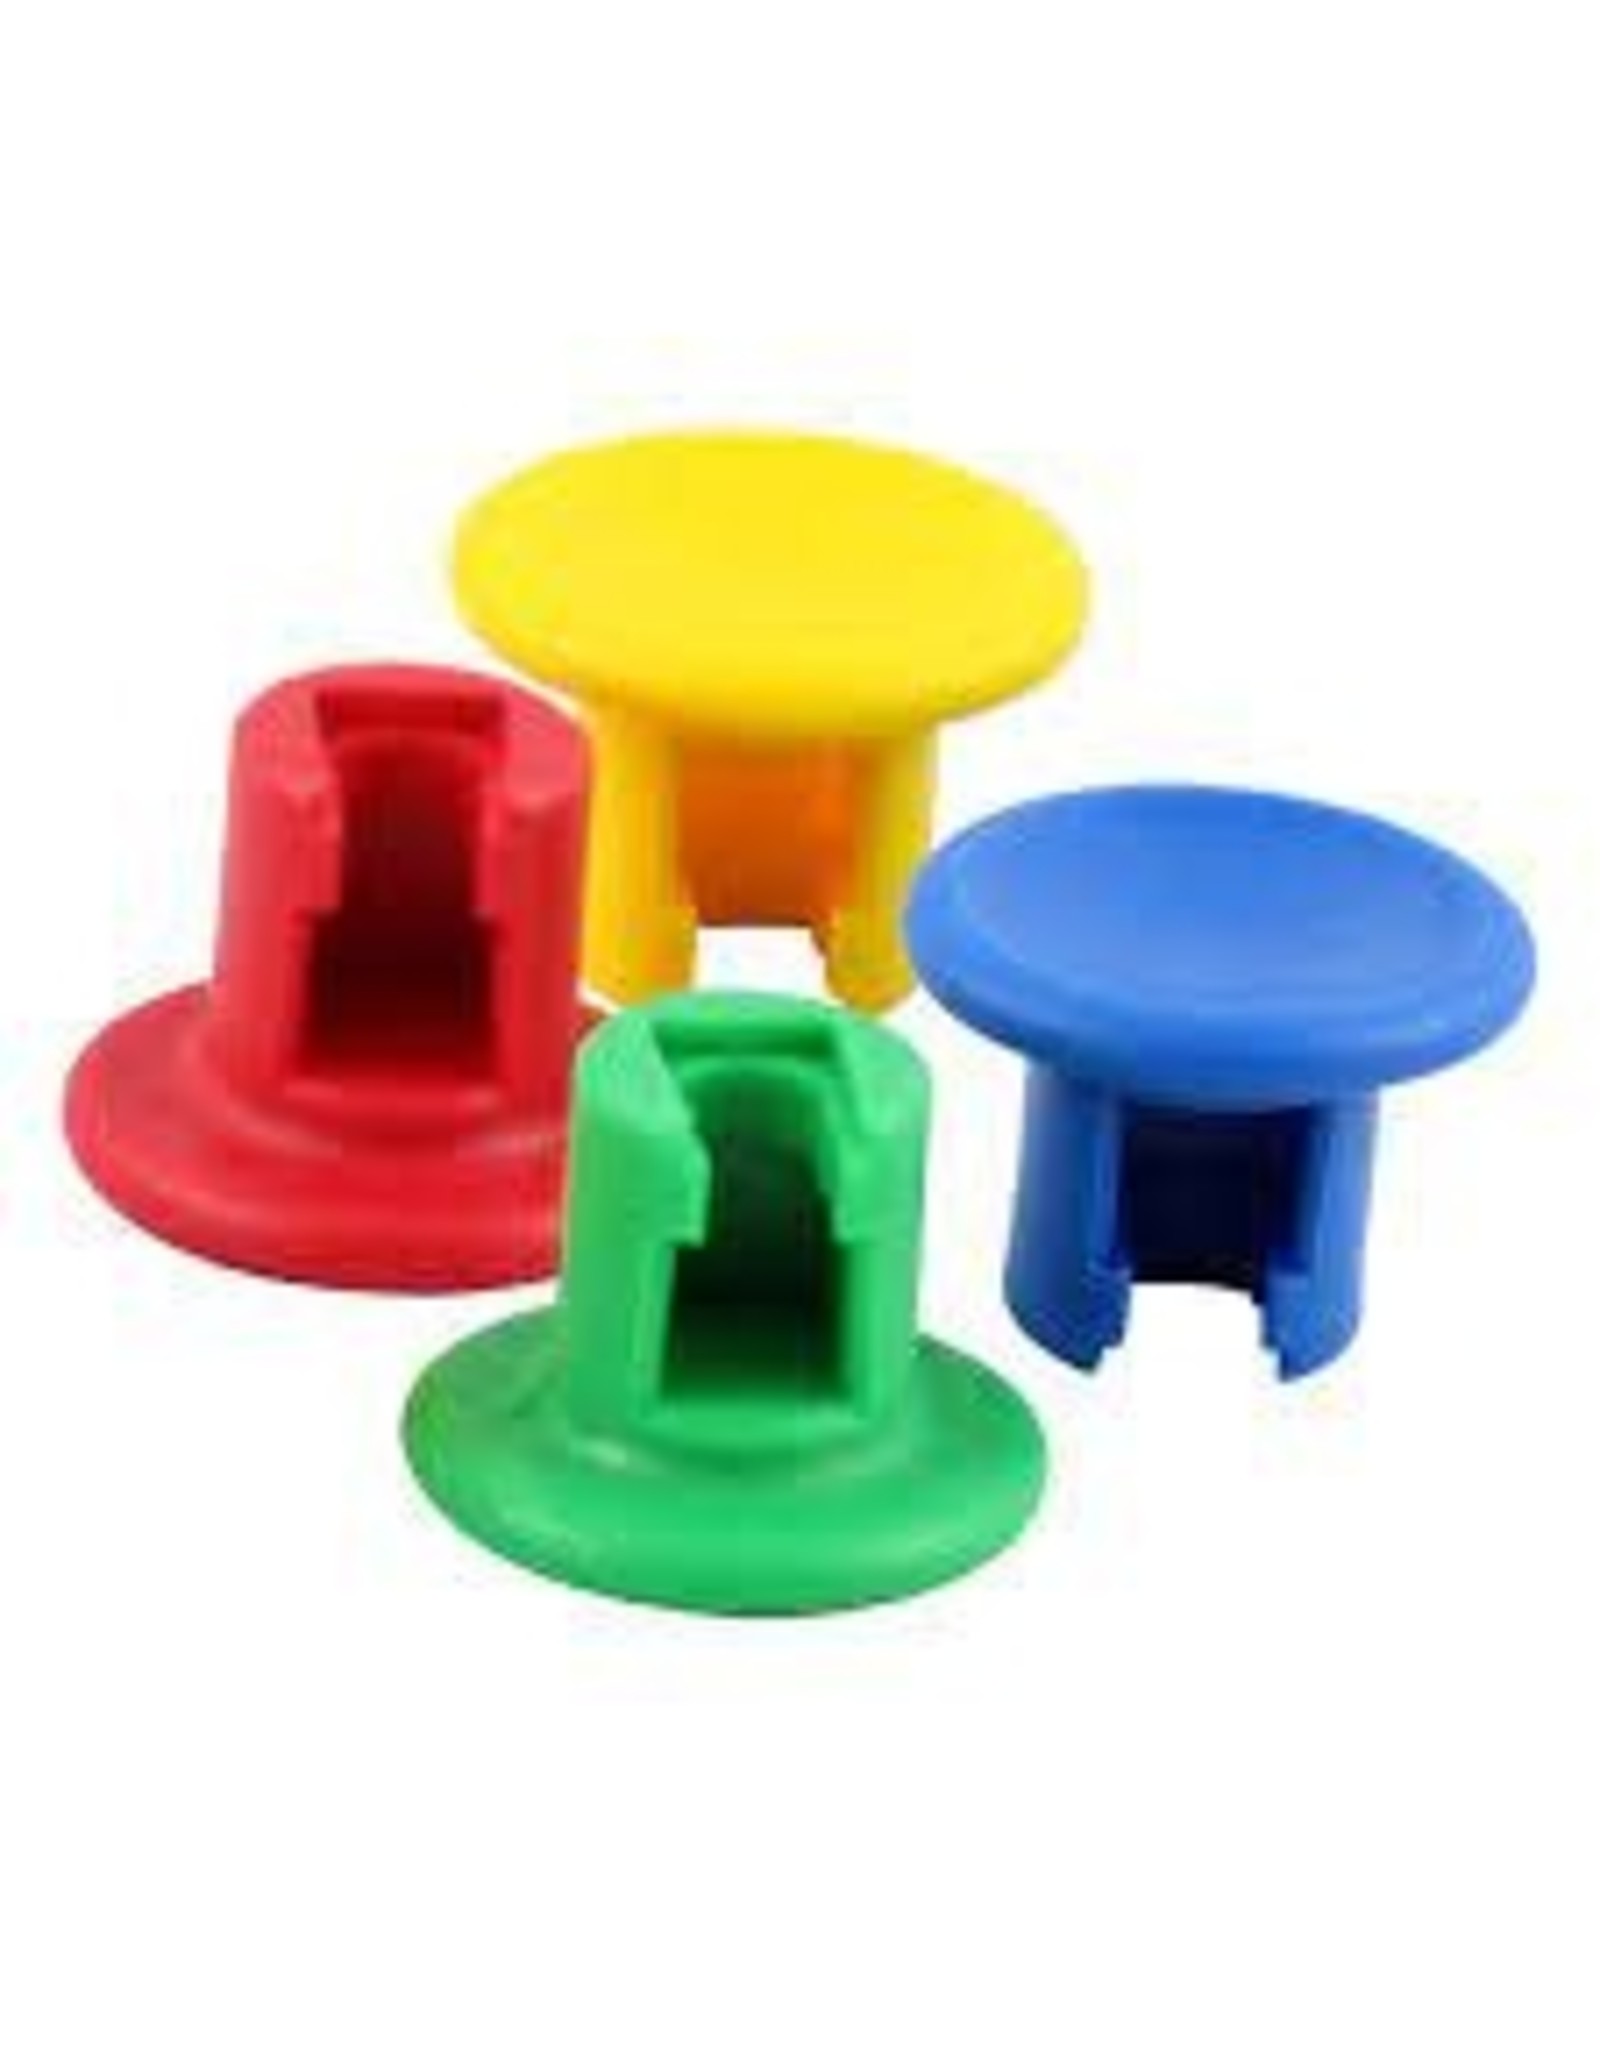 NJ Phillips Coloured Knobs For Repeaters 4pk - 109936